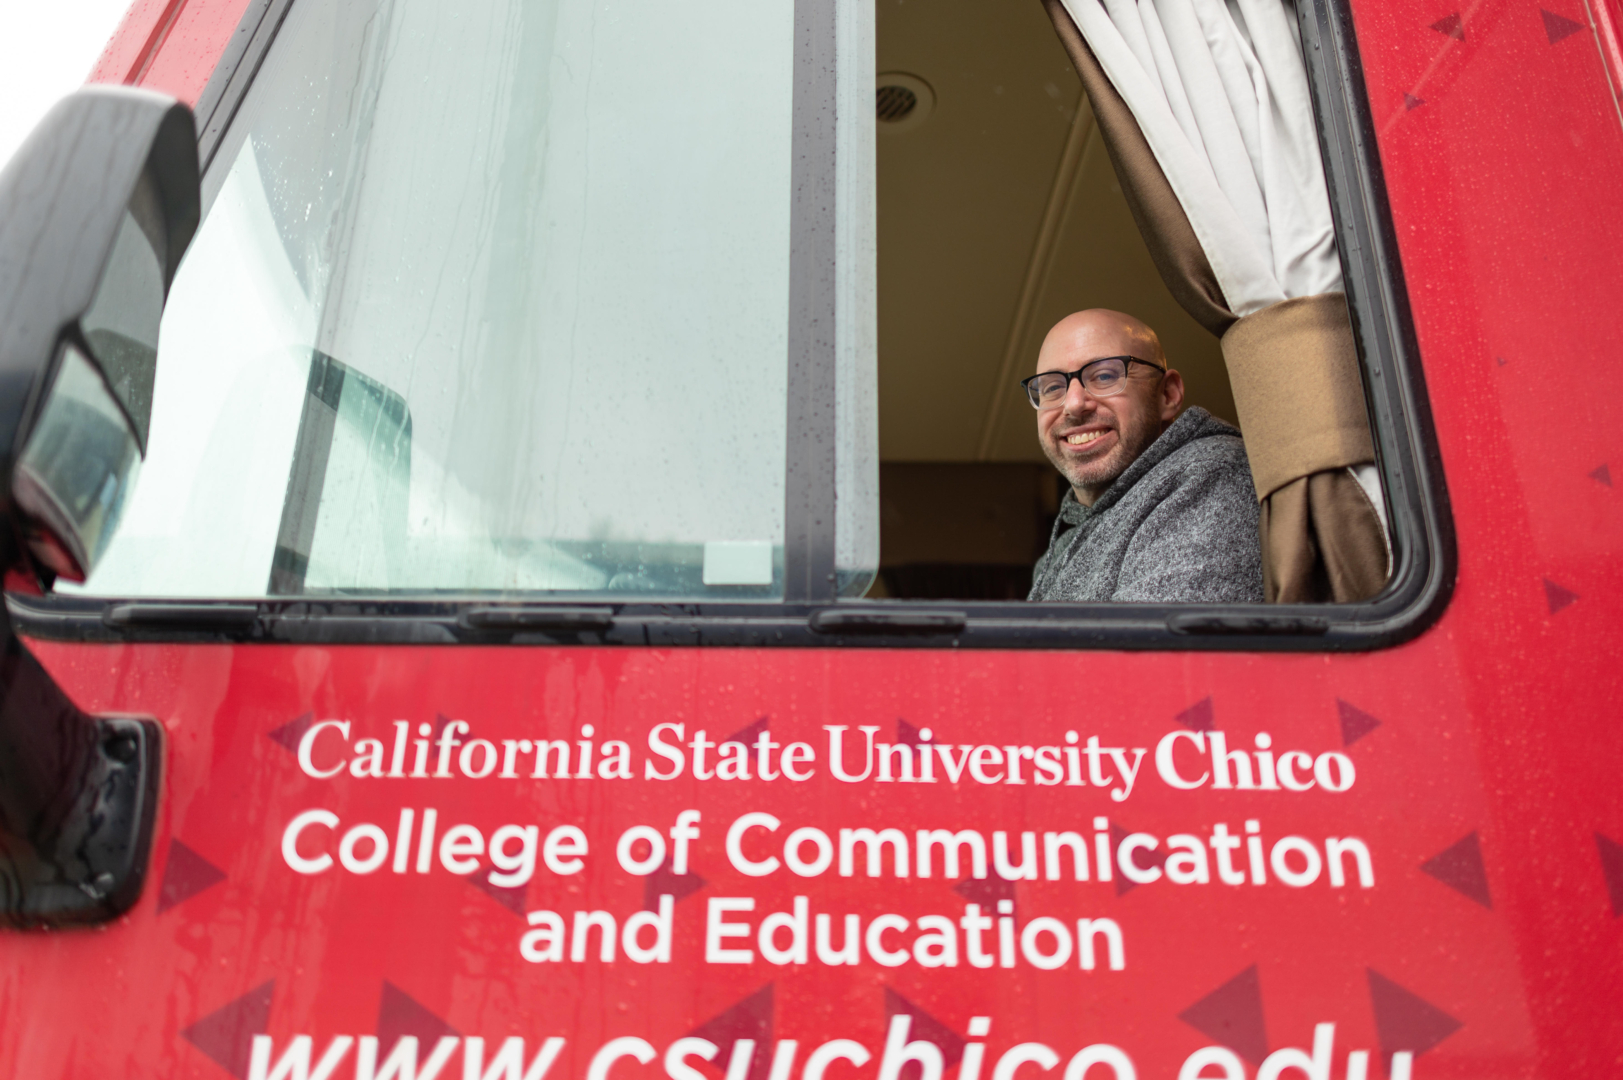 Tal Slemrod smiles while sitting in the front seat of the Mobile Classroom.